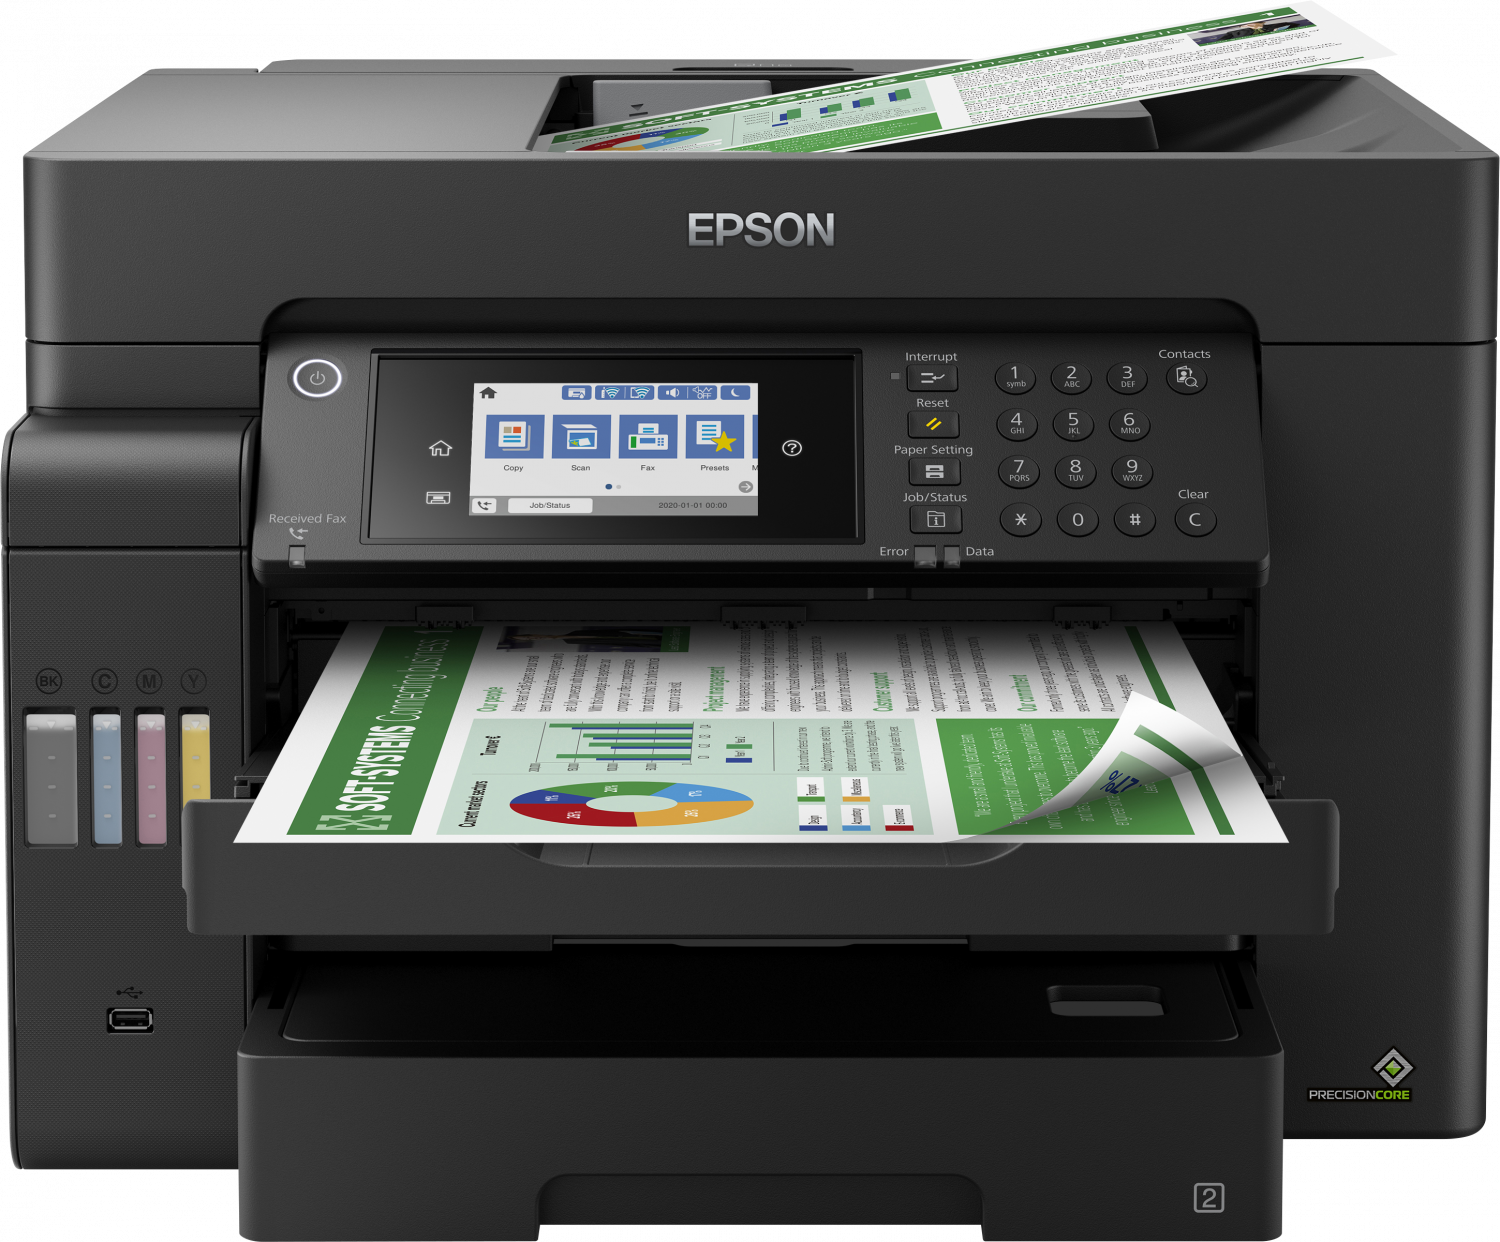 Step-by-step Driver Epson Printer L15180 Kali Linux Installation - Featured